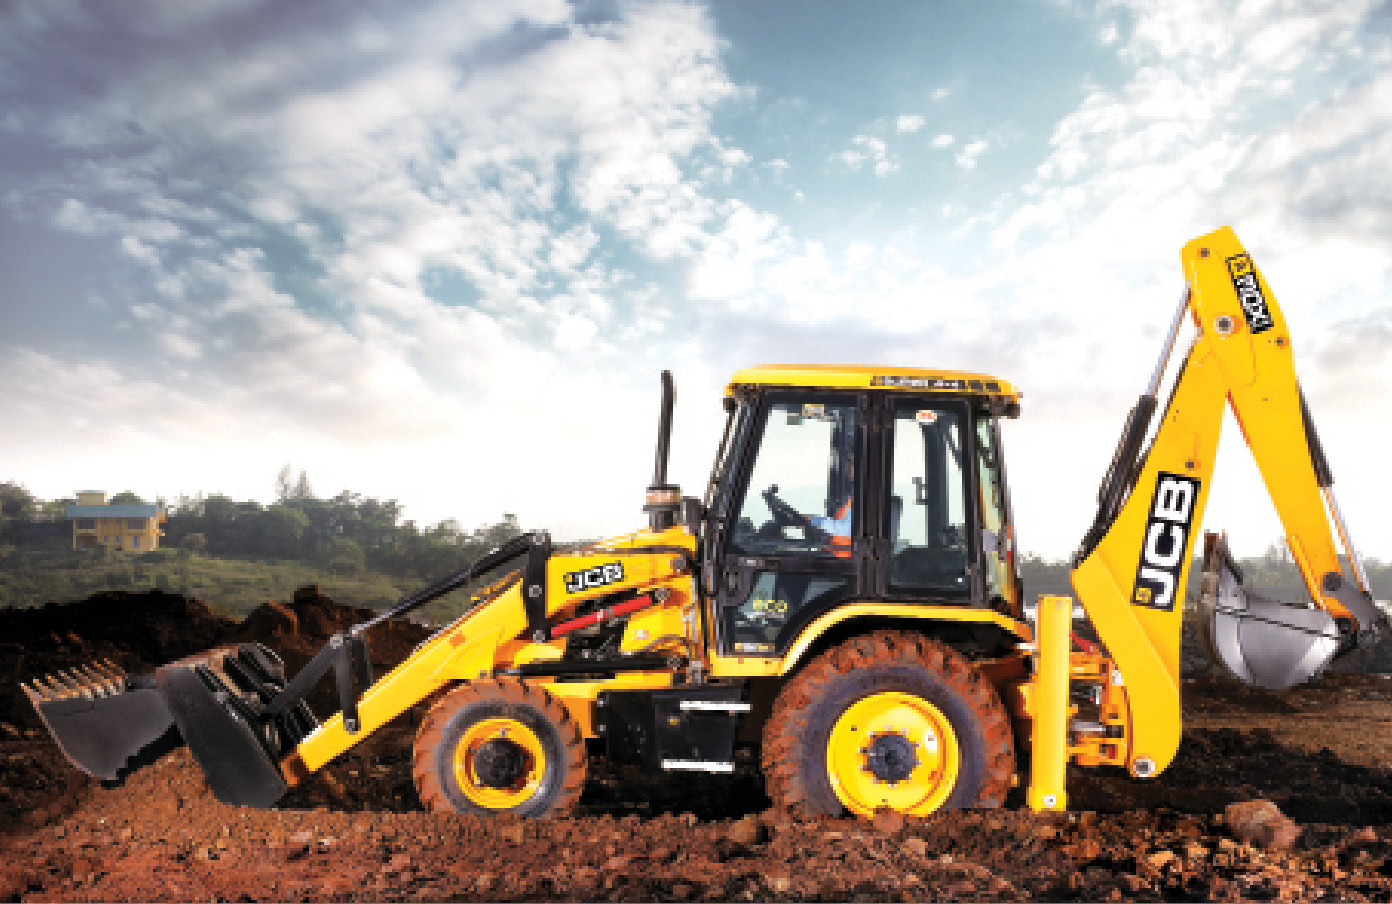 About 20 percent of JCB India's revenues come from exports ...